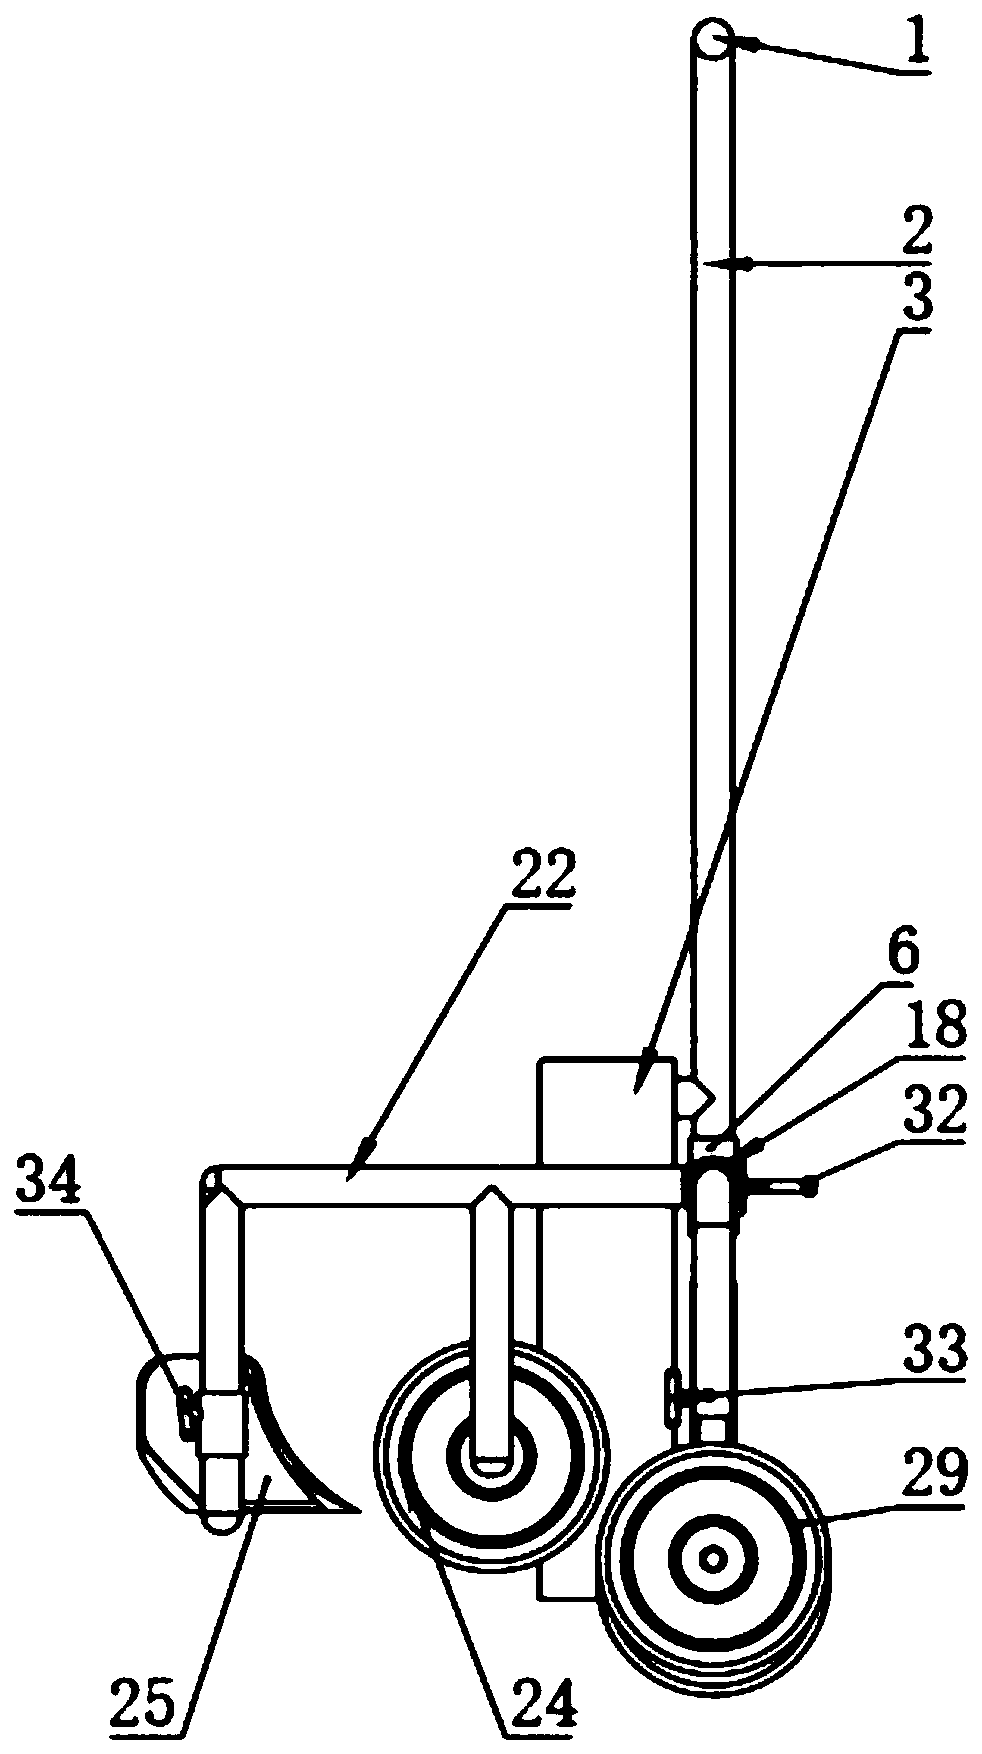 Film laying device